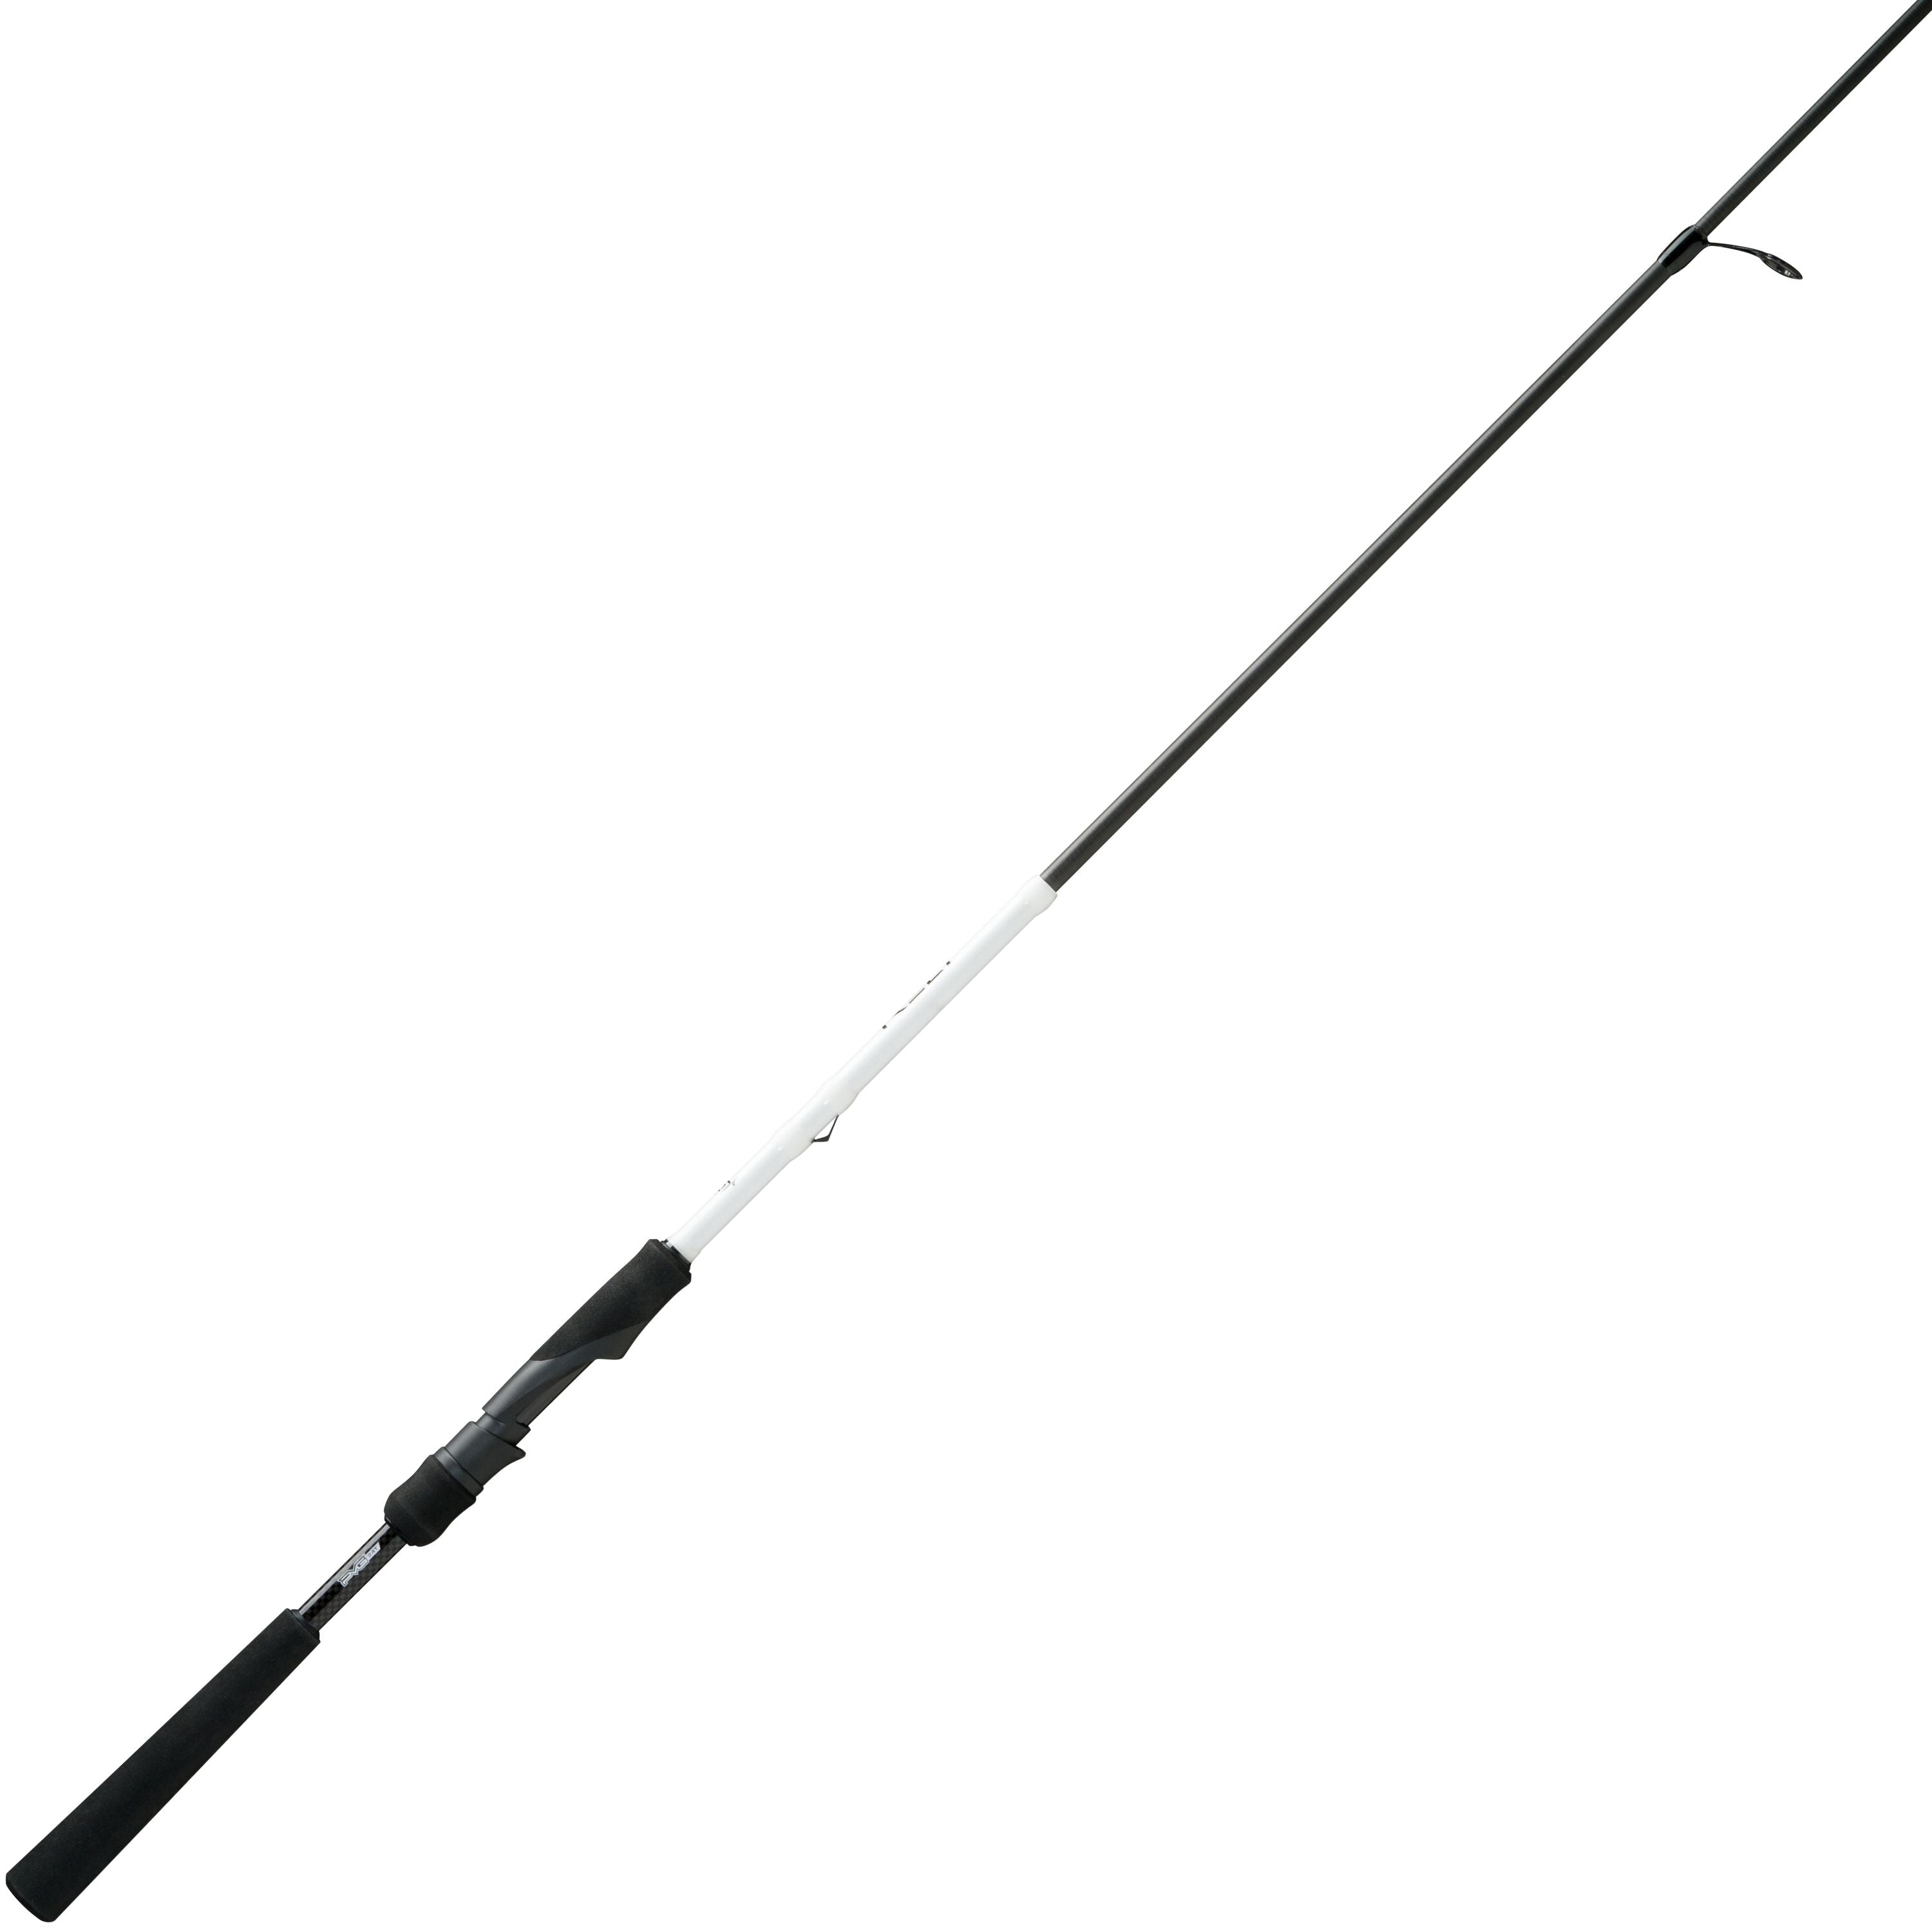 13Fishing Rely Black Spin 2pcs -  webstore